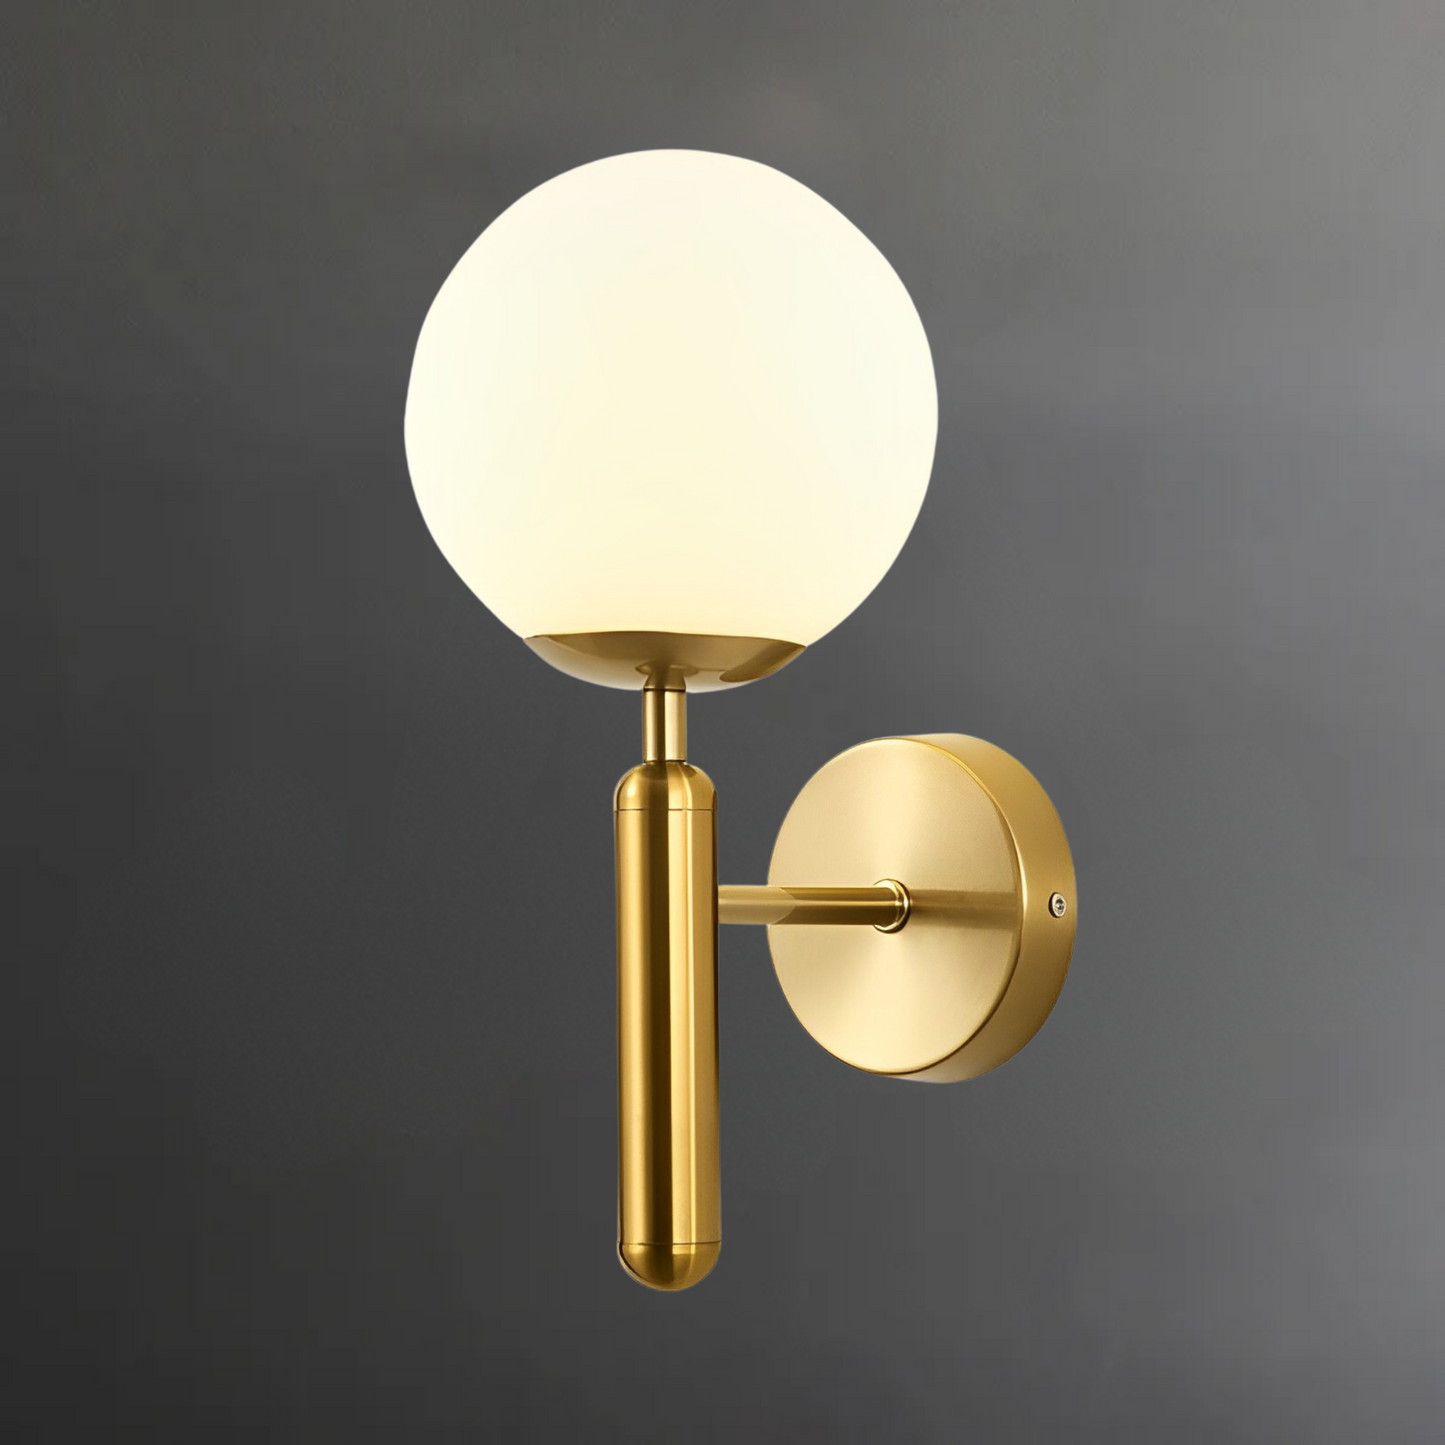 Load image into Gallery viewer, Modern Wall Light/Wall Lamp by Gloss (WL-B0032)
